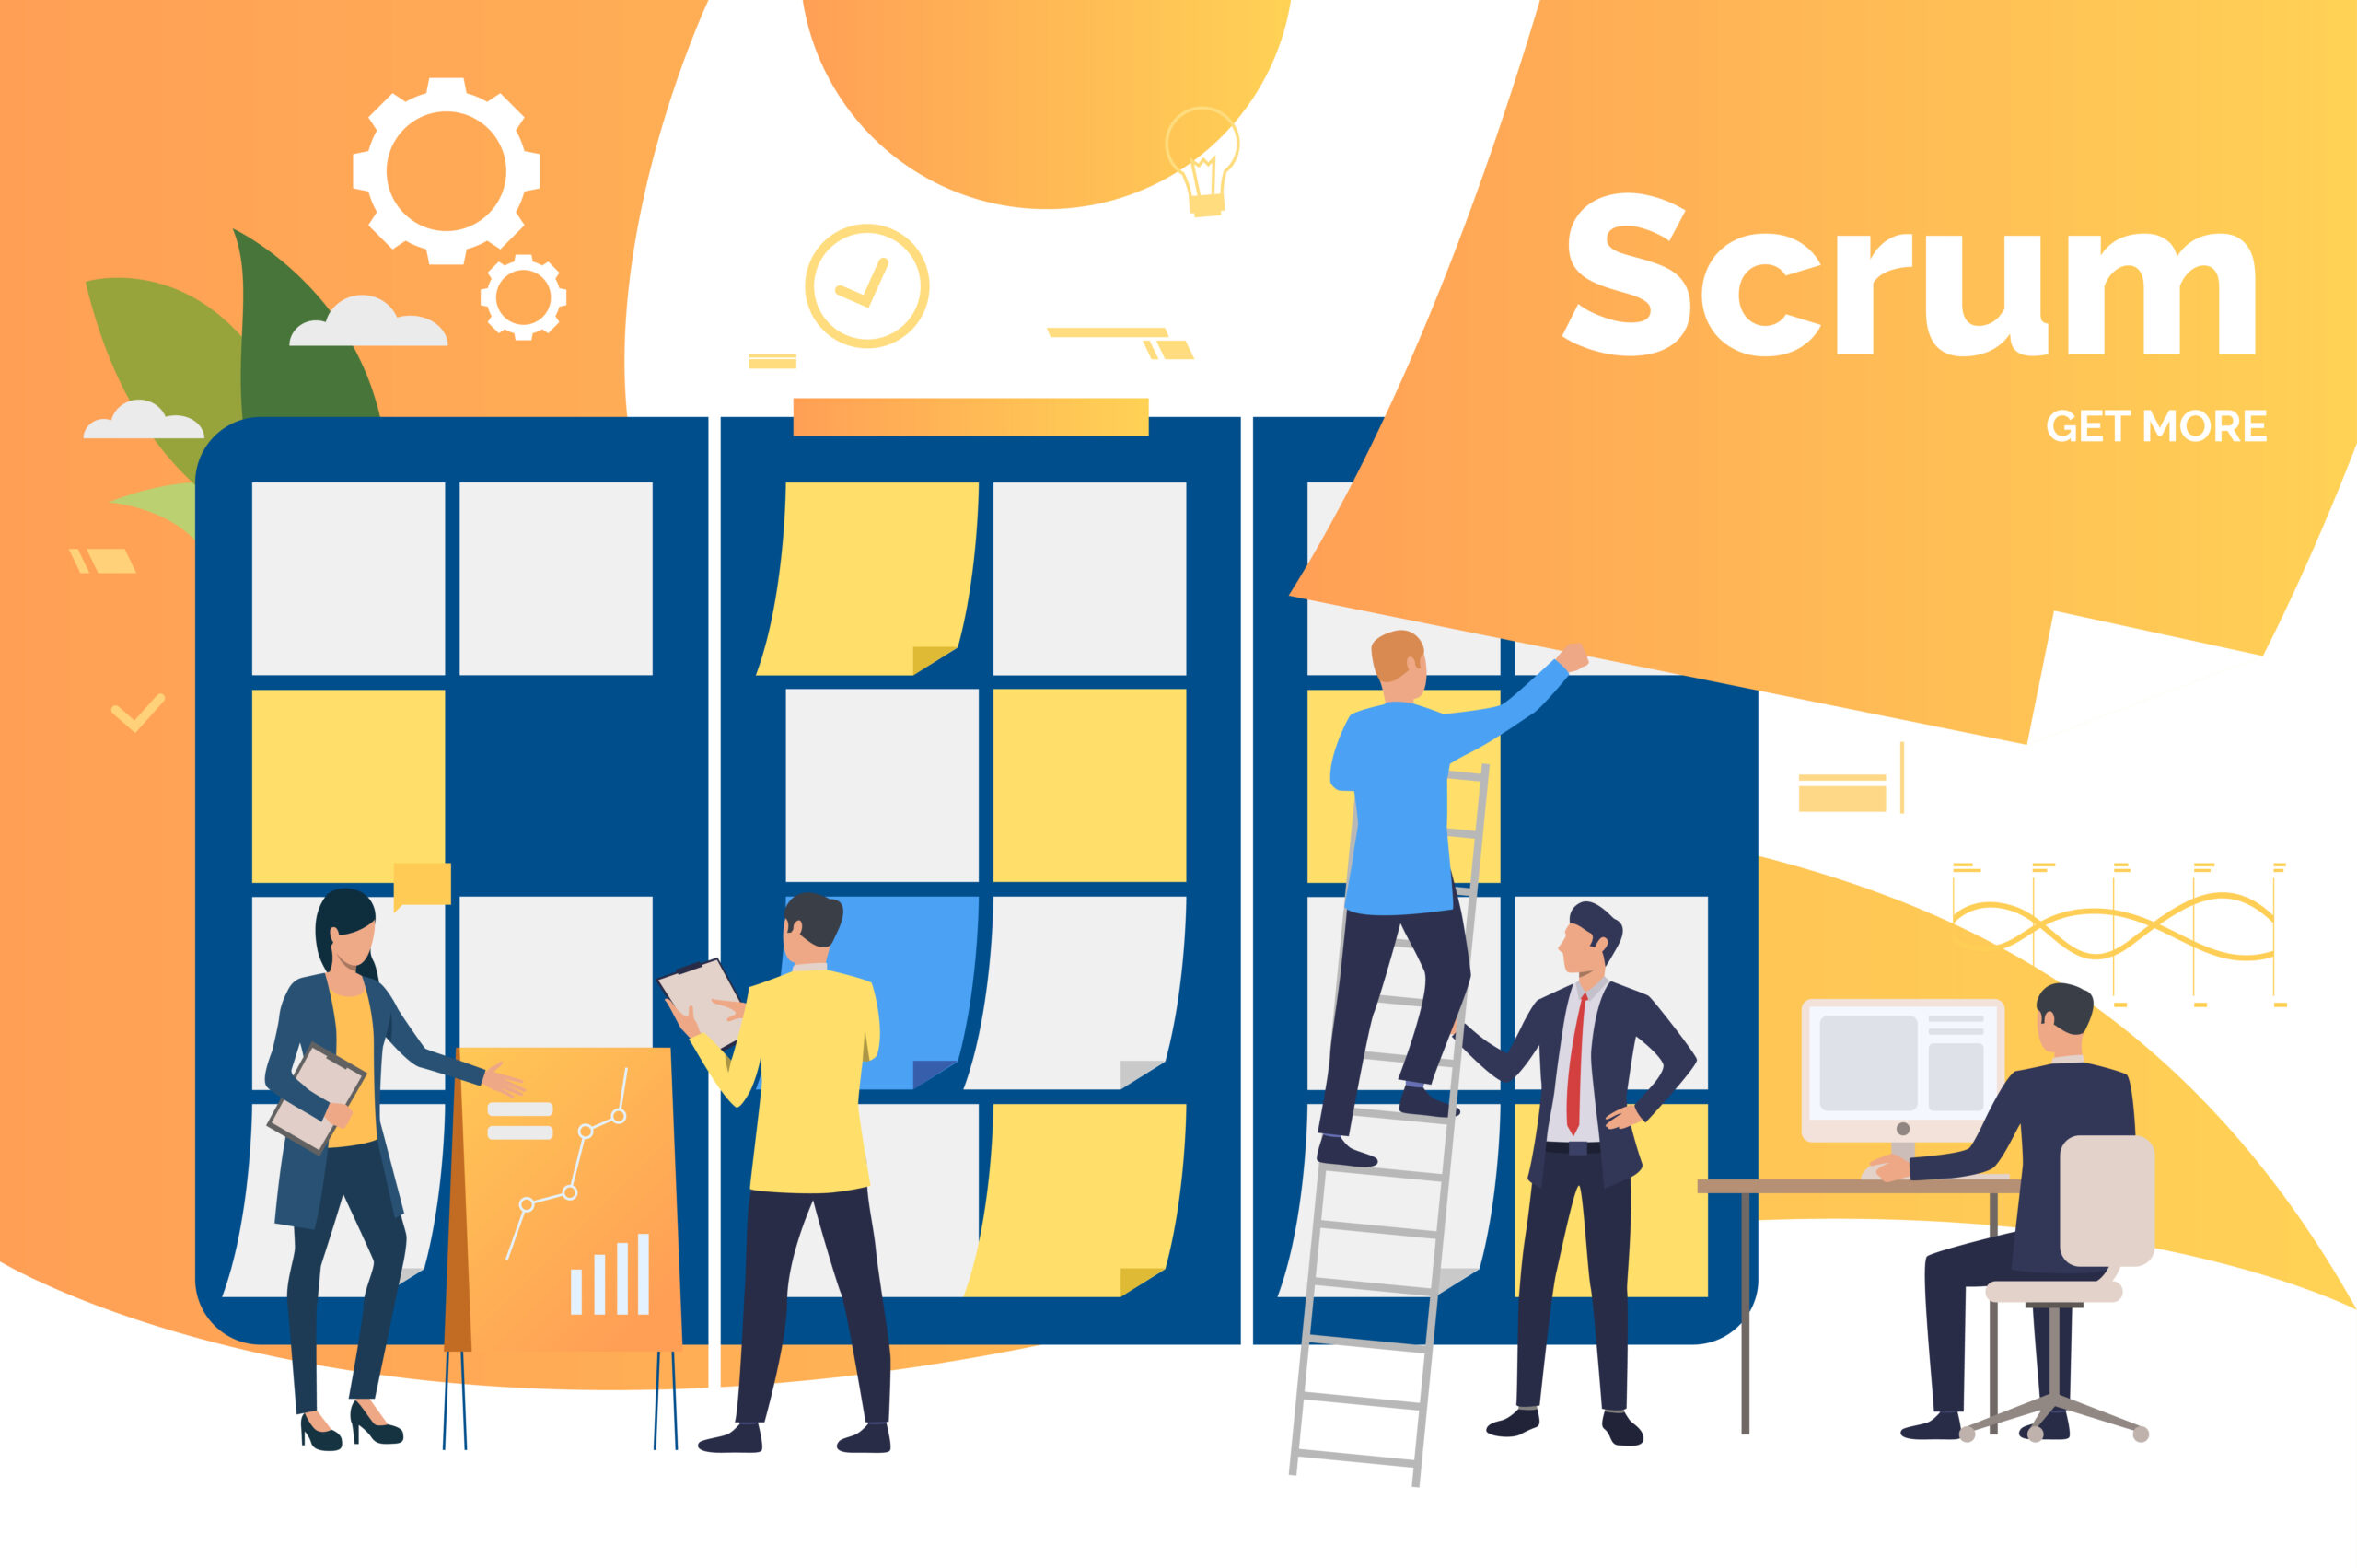 What is the role of the Scrum Master in Agile?